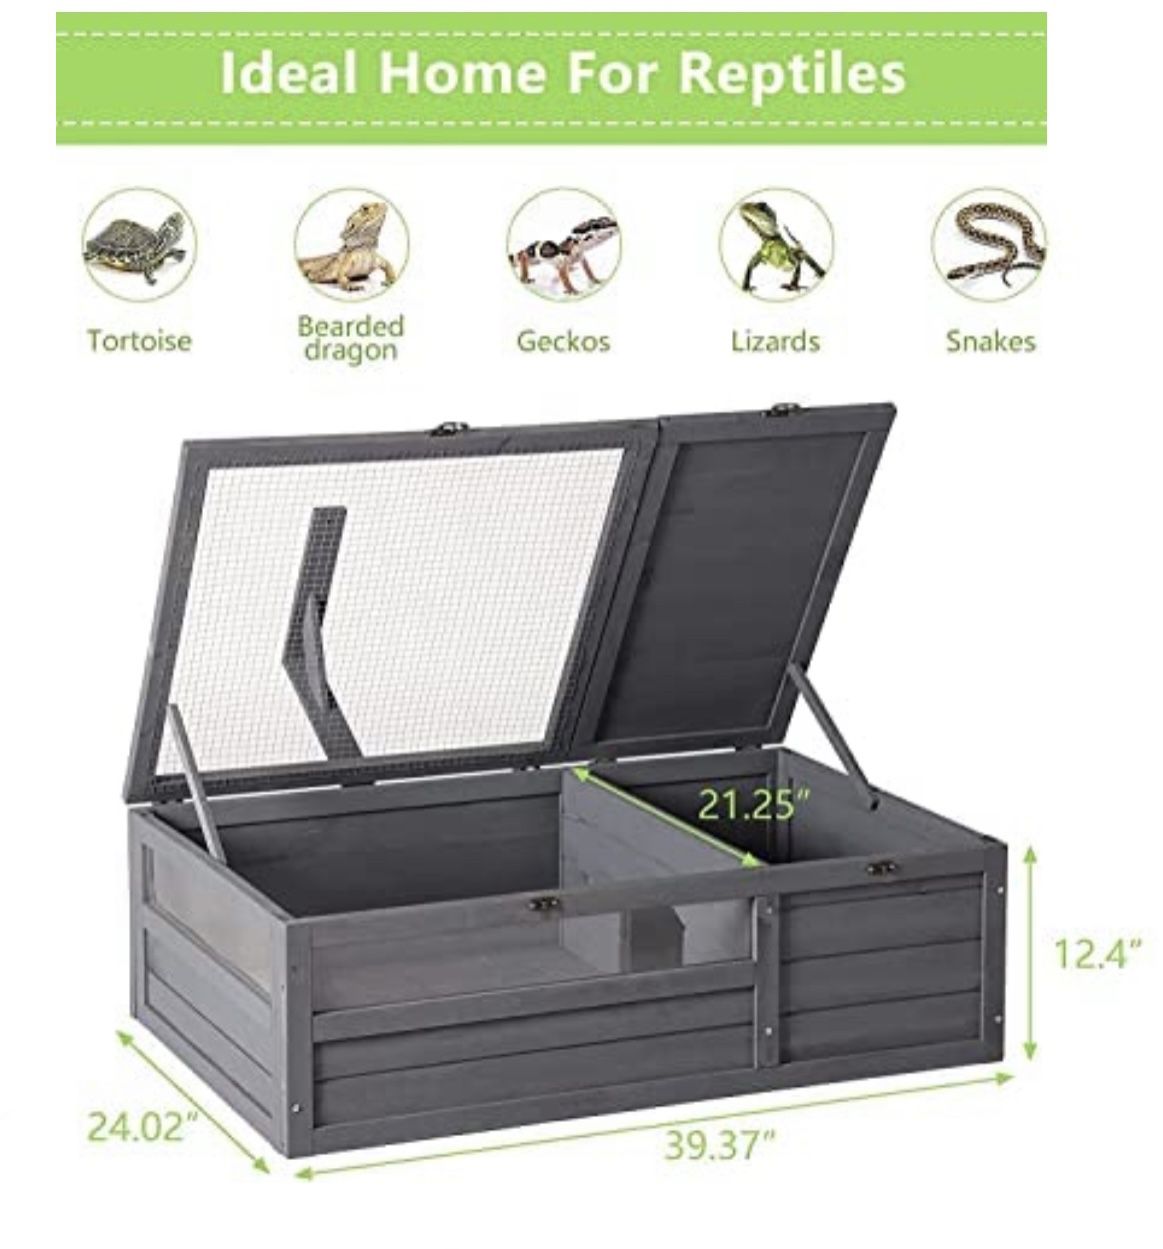 Reduced! New in Box, Grepatio Small Pet/Reptile Habitat, Large Enclosure with Light Support & Weatherproof 